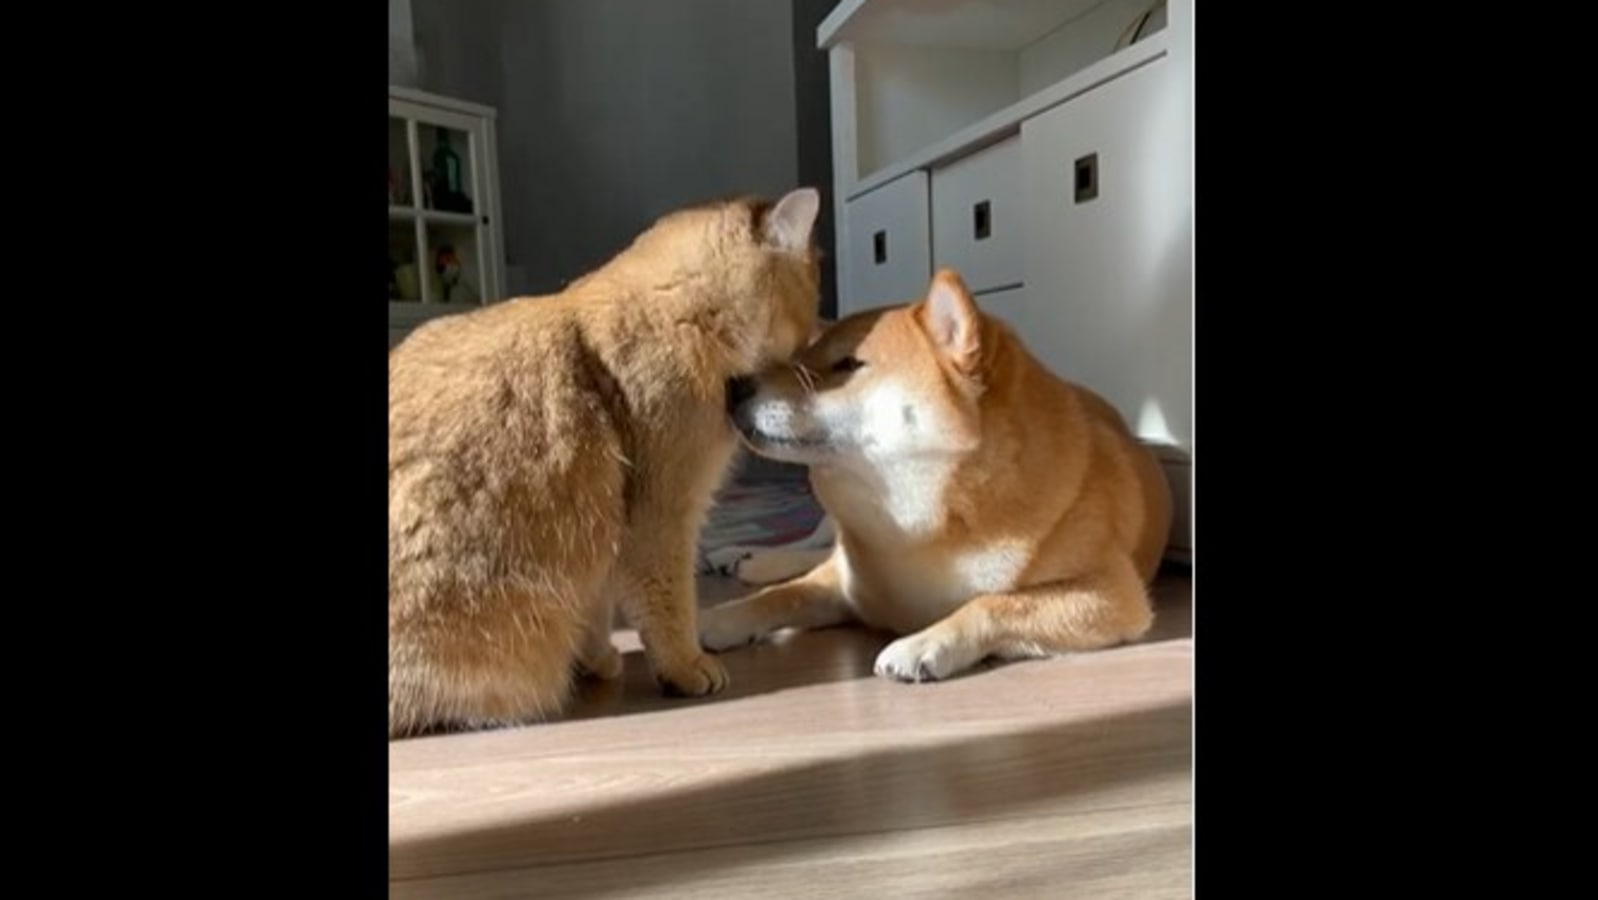 So this is love': bond between Instagram cat and dog duo melts ...